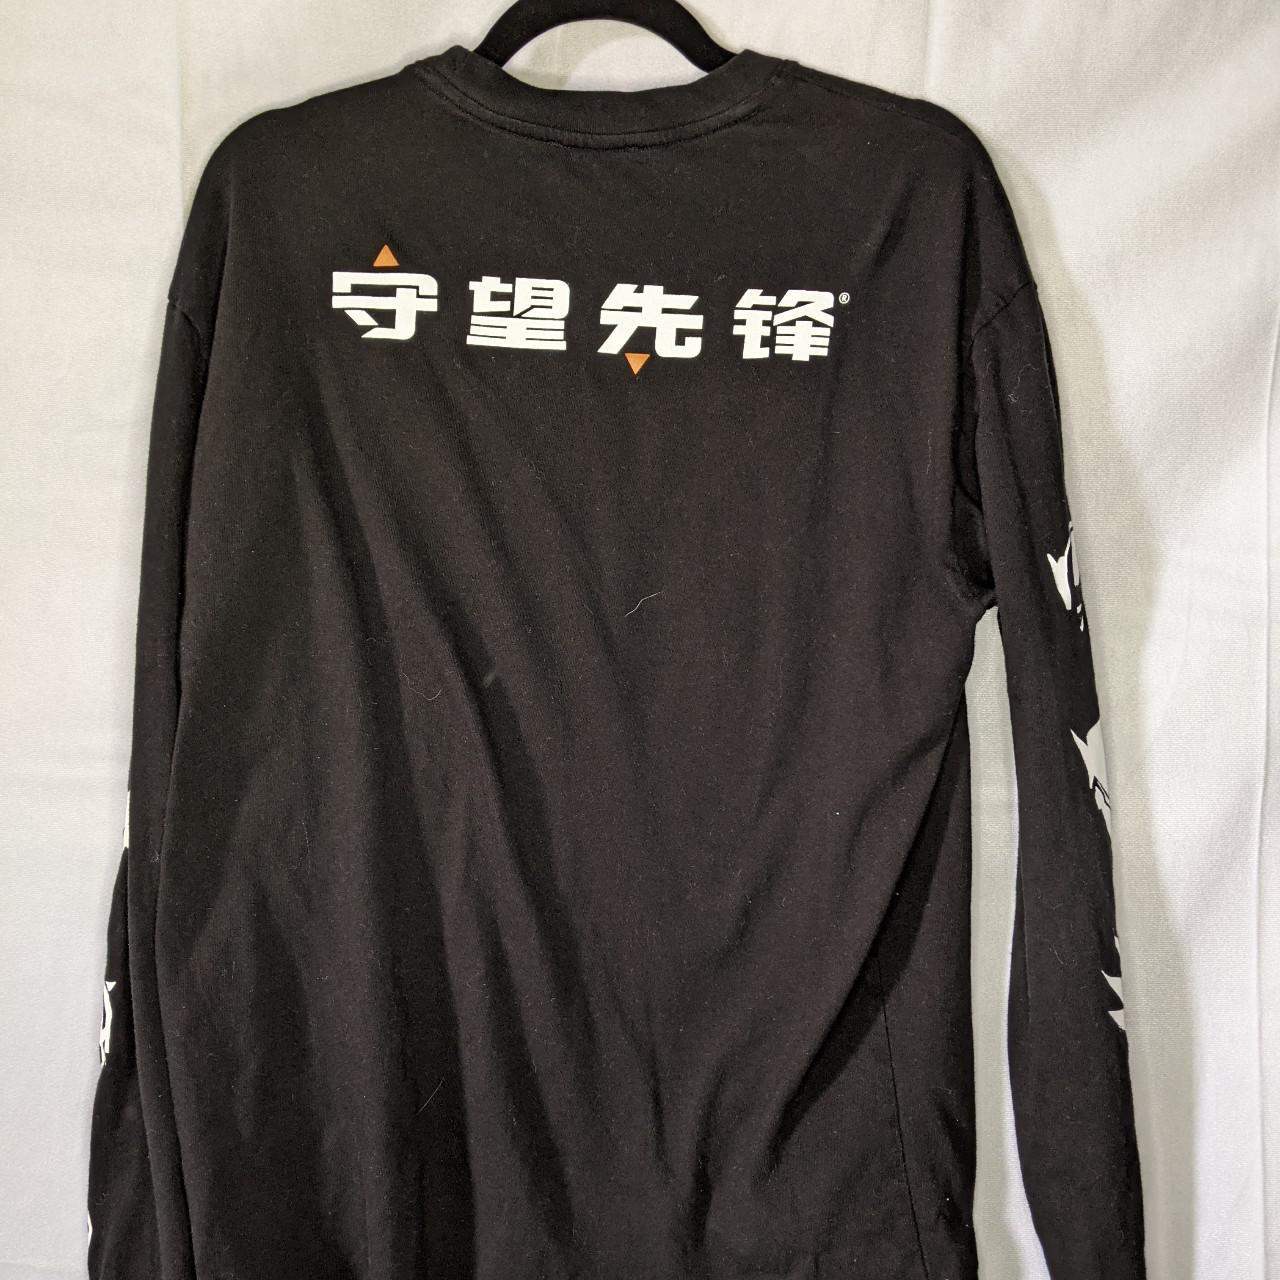 Product Image 3 - OVERWATCH LONG SLEEVE SMALL

#OVERWATCH #BLIZZARD